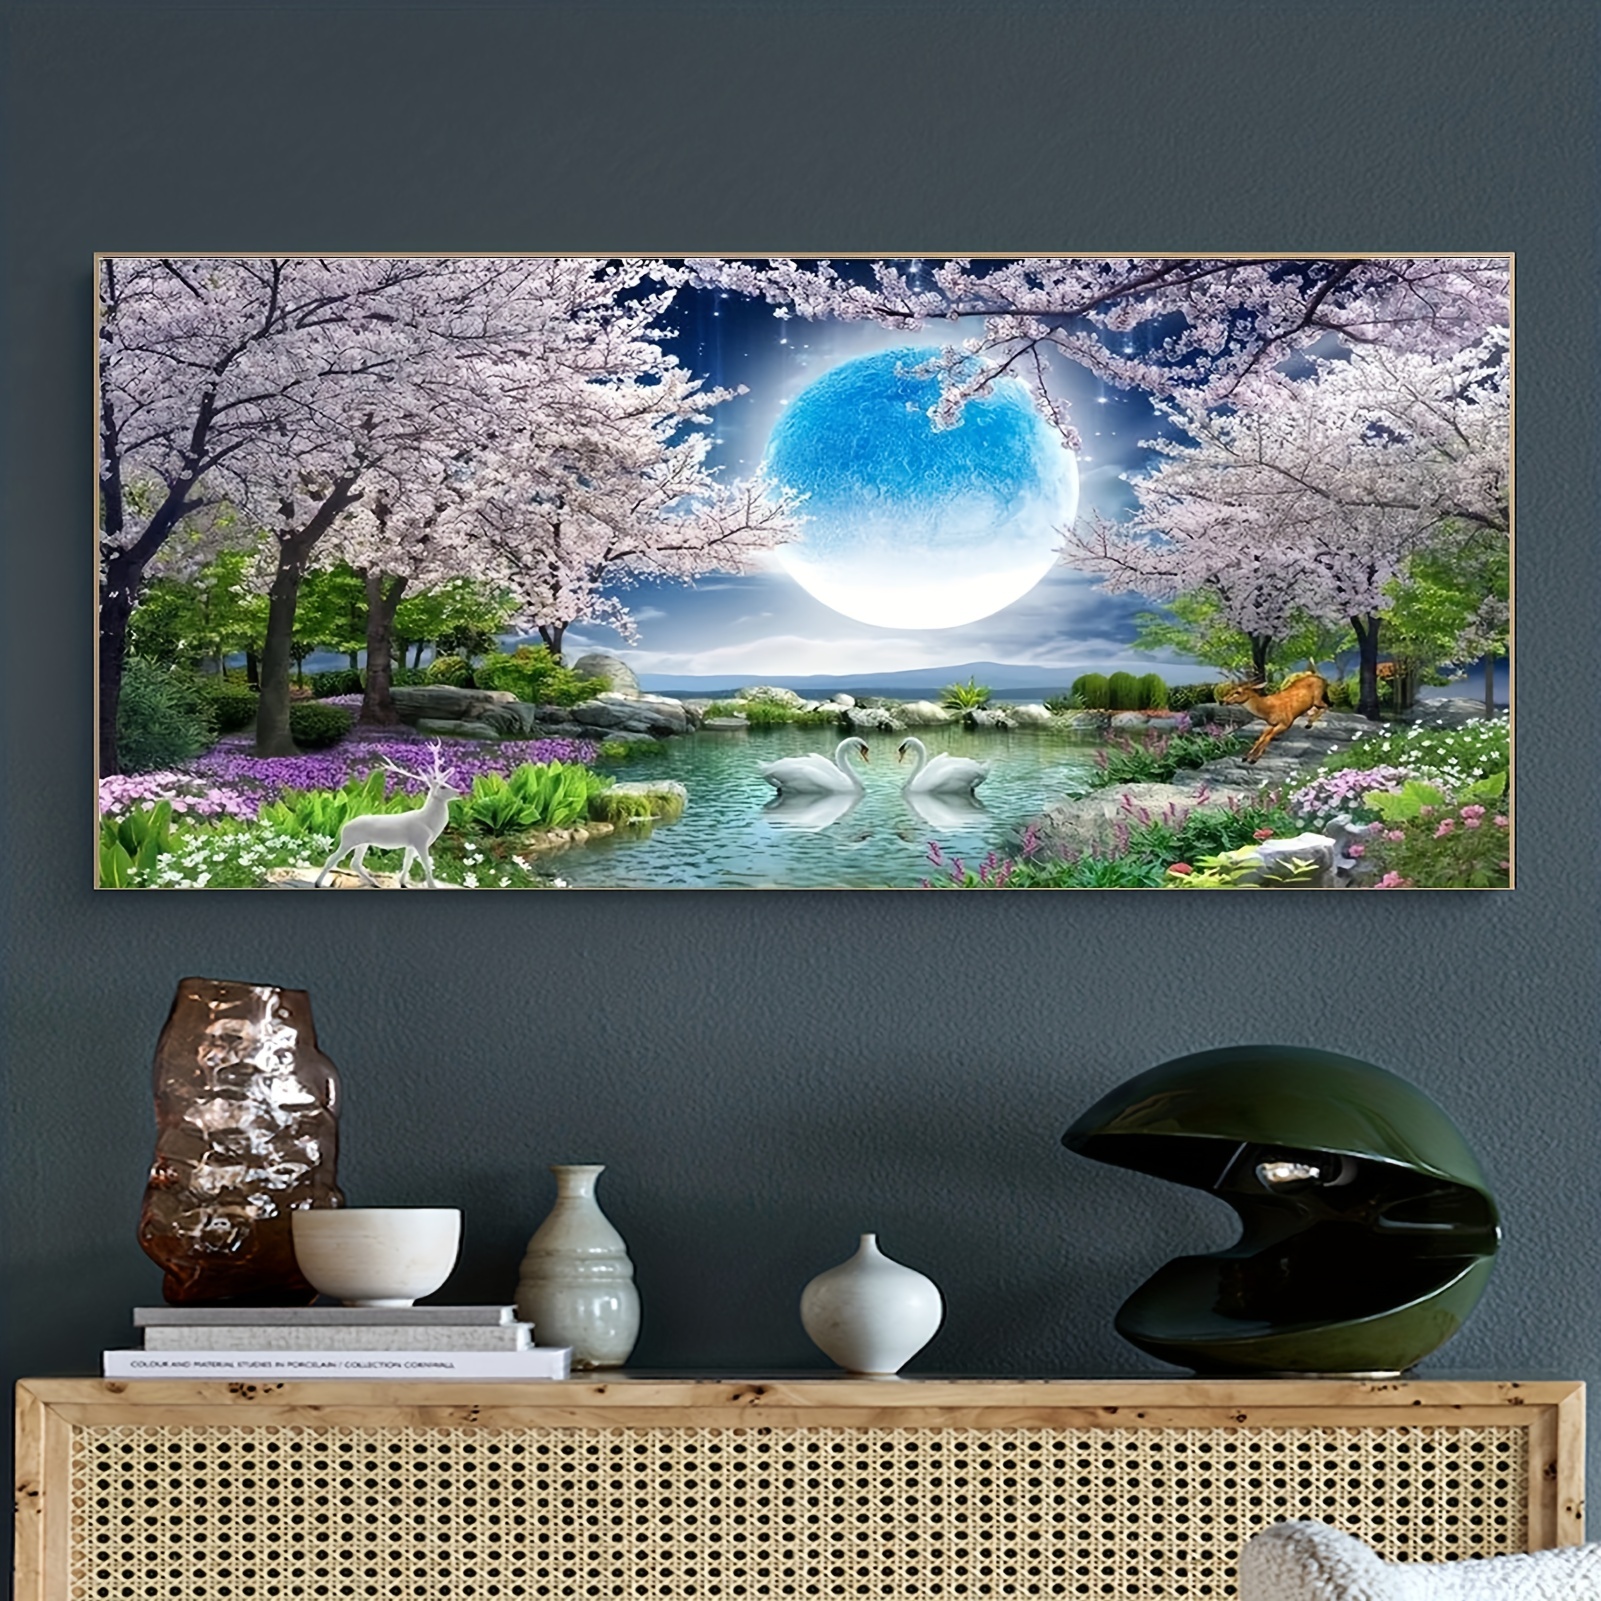 YALKIN 5D Large Diamond Painting Kits for Adults (31.5x15.7inch), Seaside  Moon Cherry Tree Full Round Drill Scenery Pictures Arts Paint by Diamonds  Kits Diamond Art Kits for Wall Decor Relax Gift 